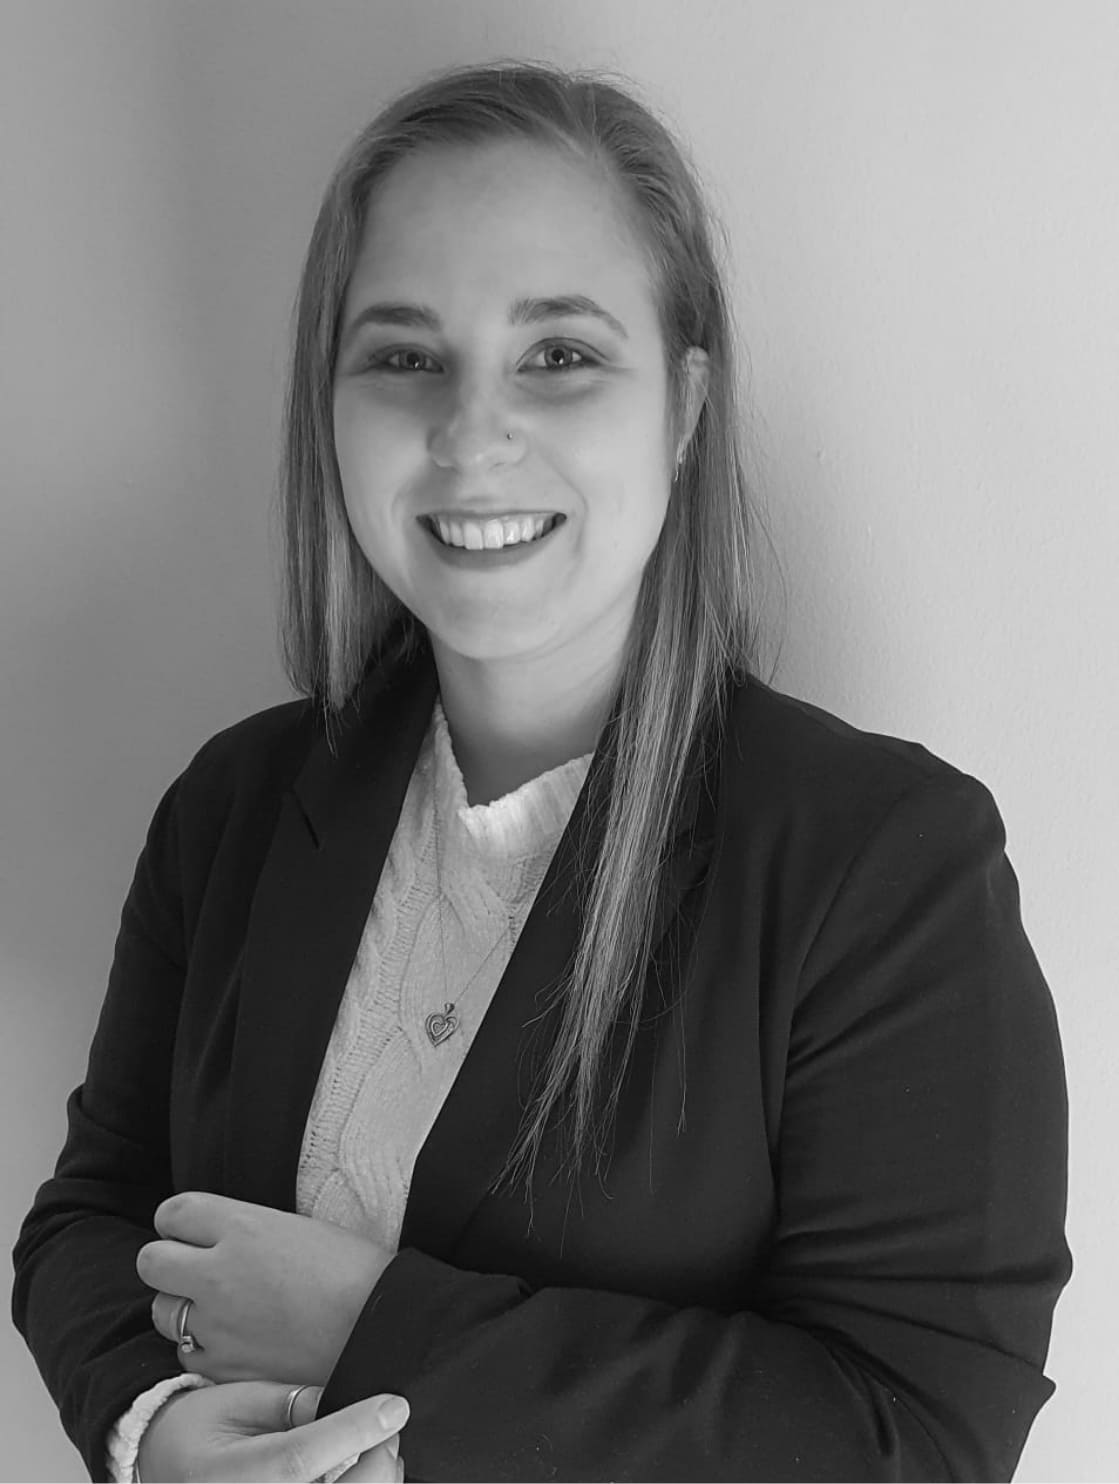 Tax Advisor at Mint Accounting, Tertia de Jager, smiling, in black and white.